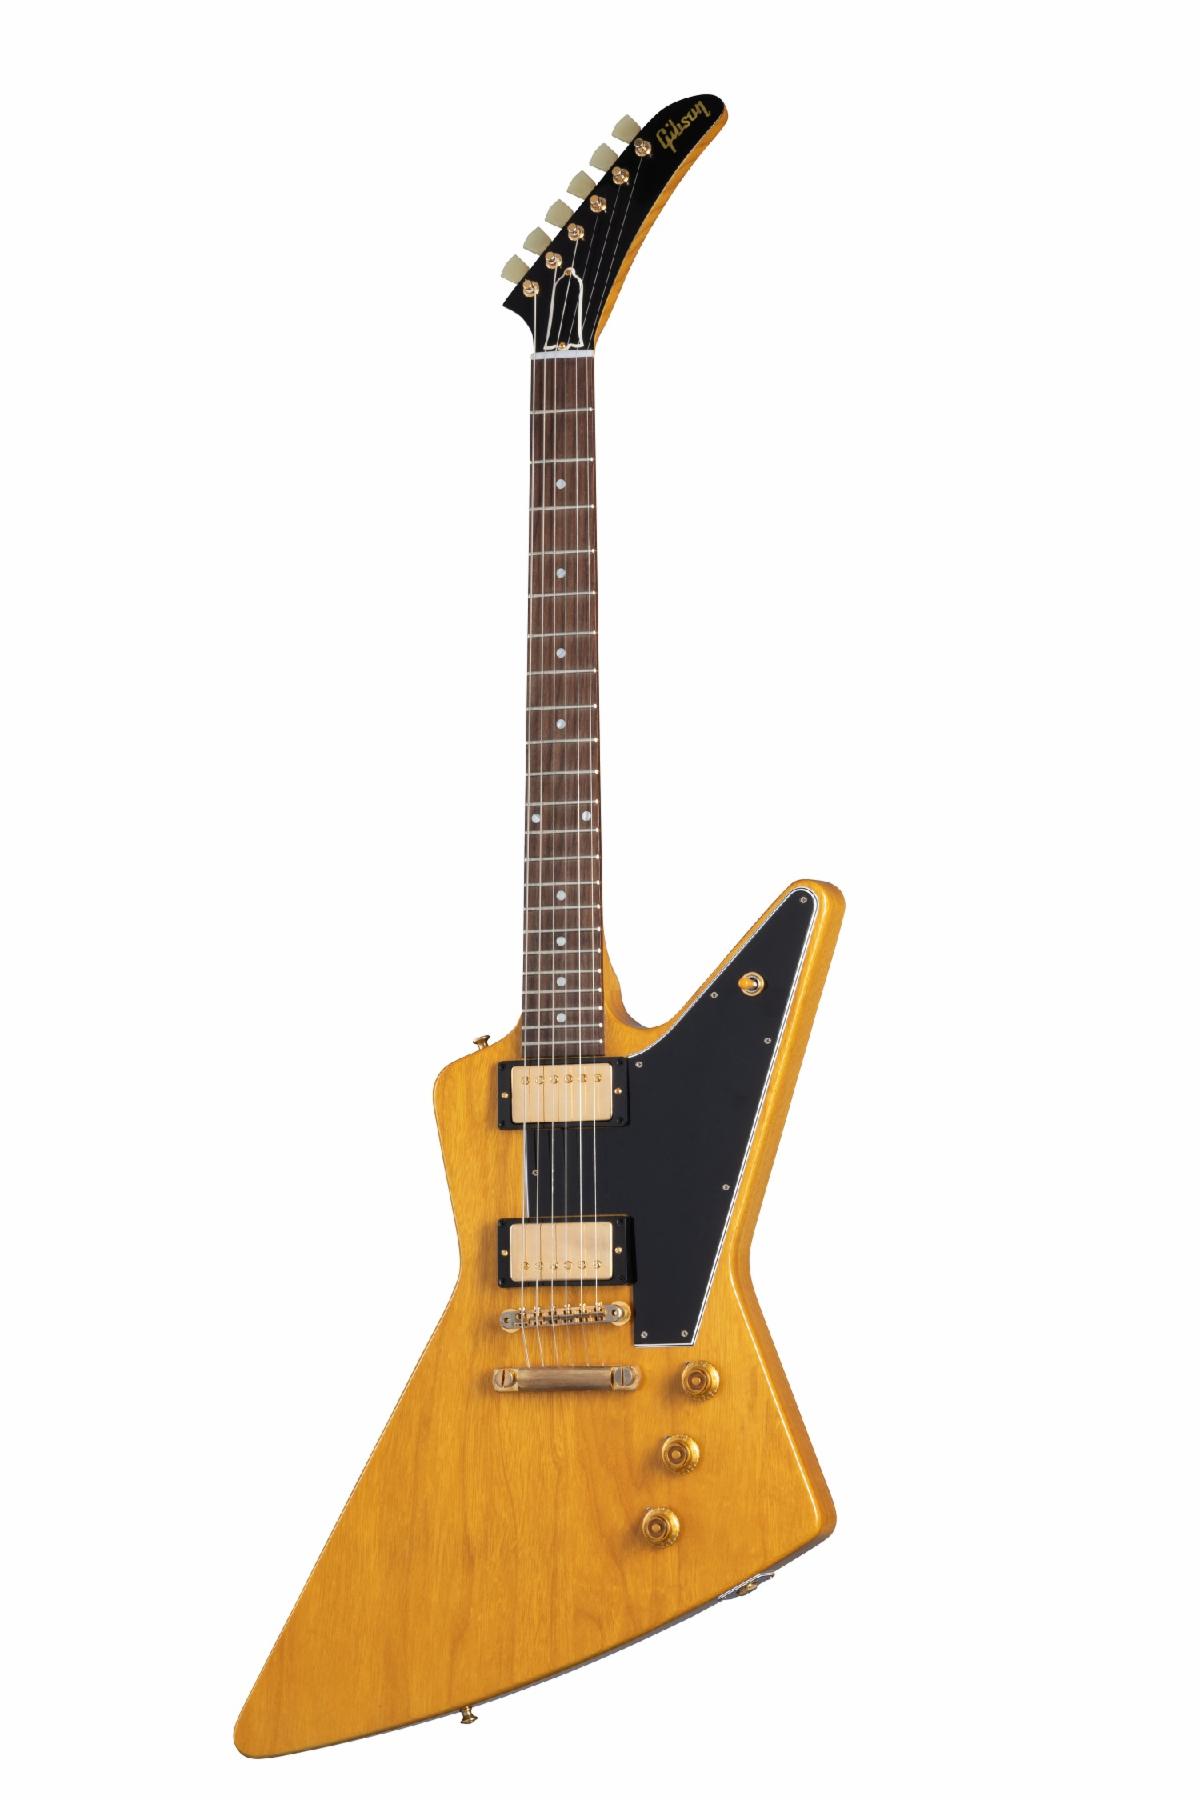  the Gibson 1958 Explorer with Black pickguard.